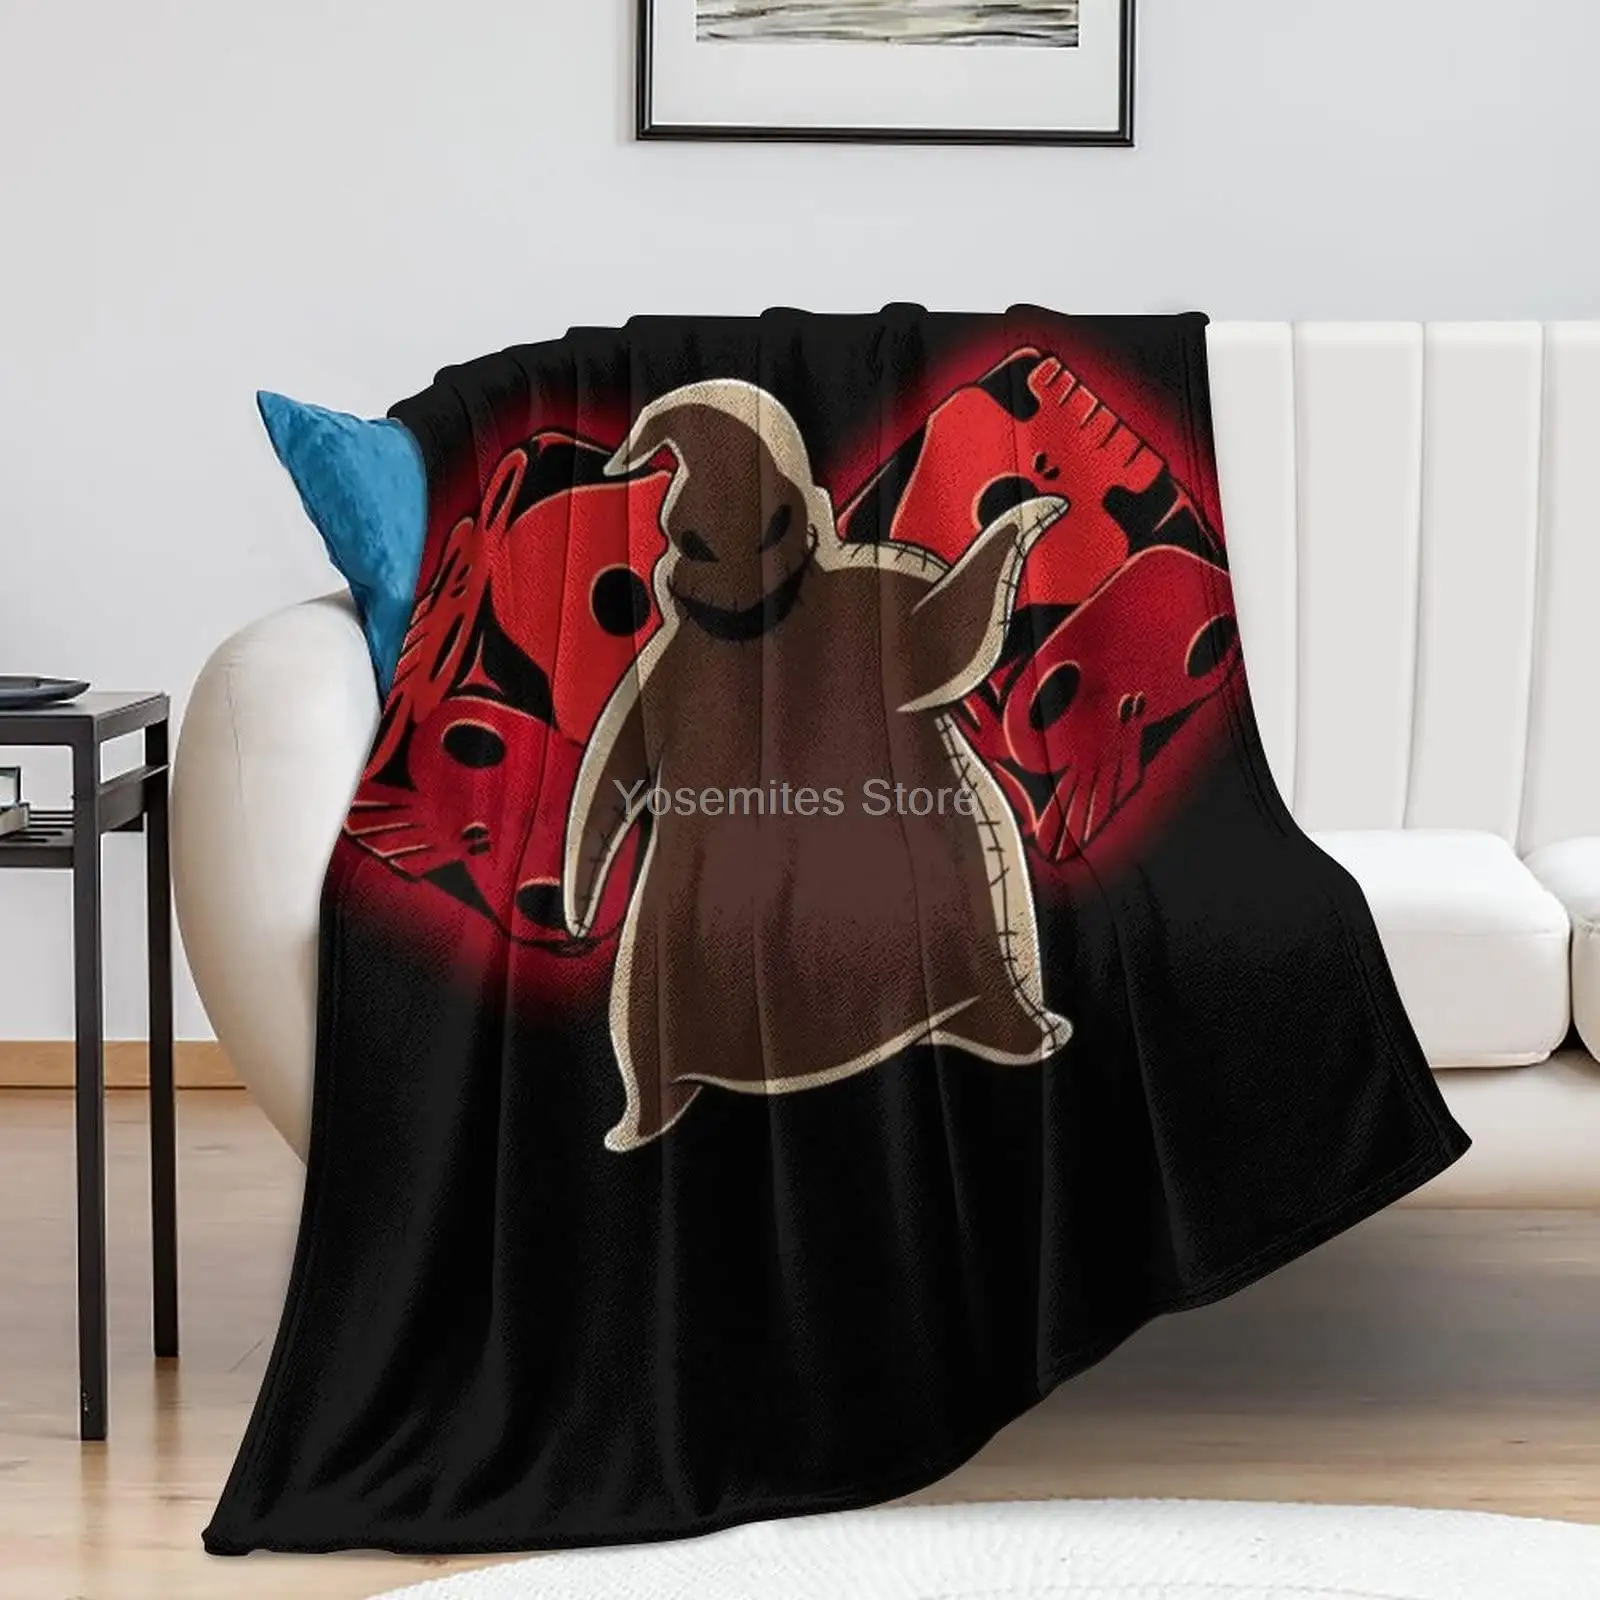 

Rnnwosio Before Christmas Super Soft Anti-Swelling Blanket Japanese Animation Art Warm and Comfortable Home Decoration Gifts